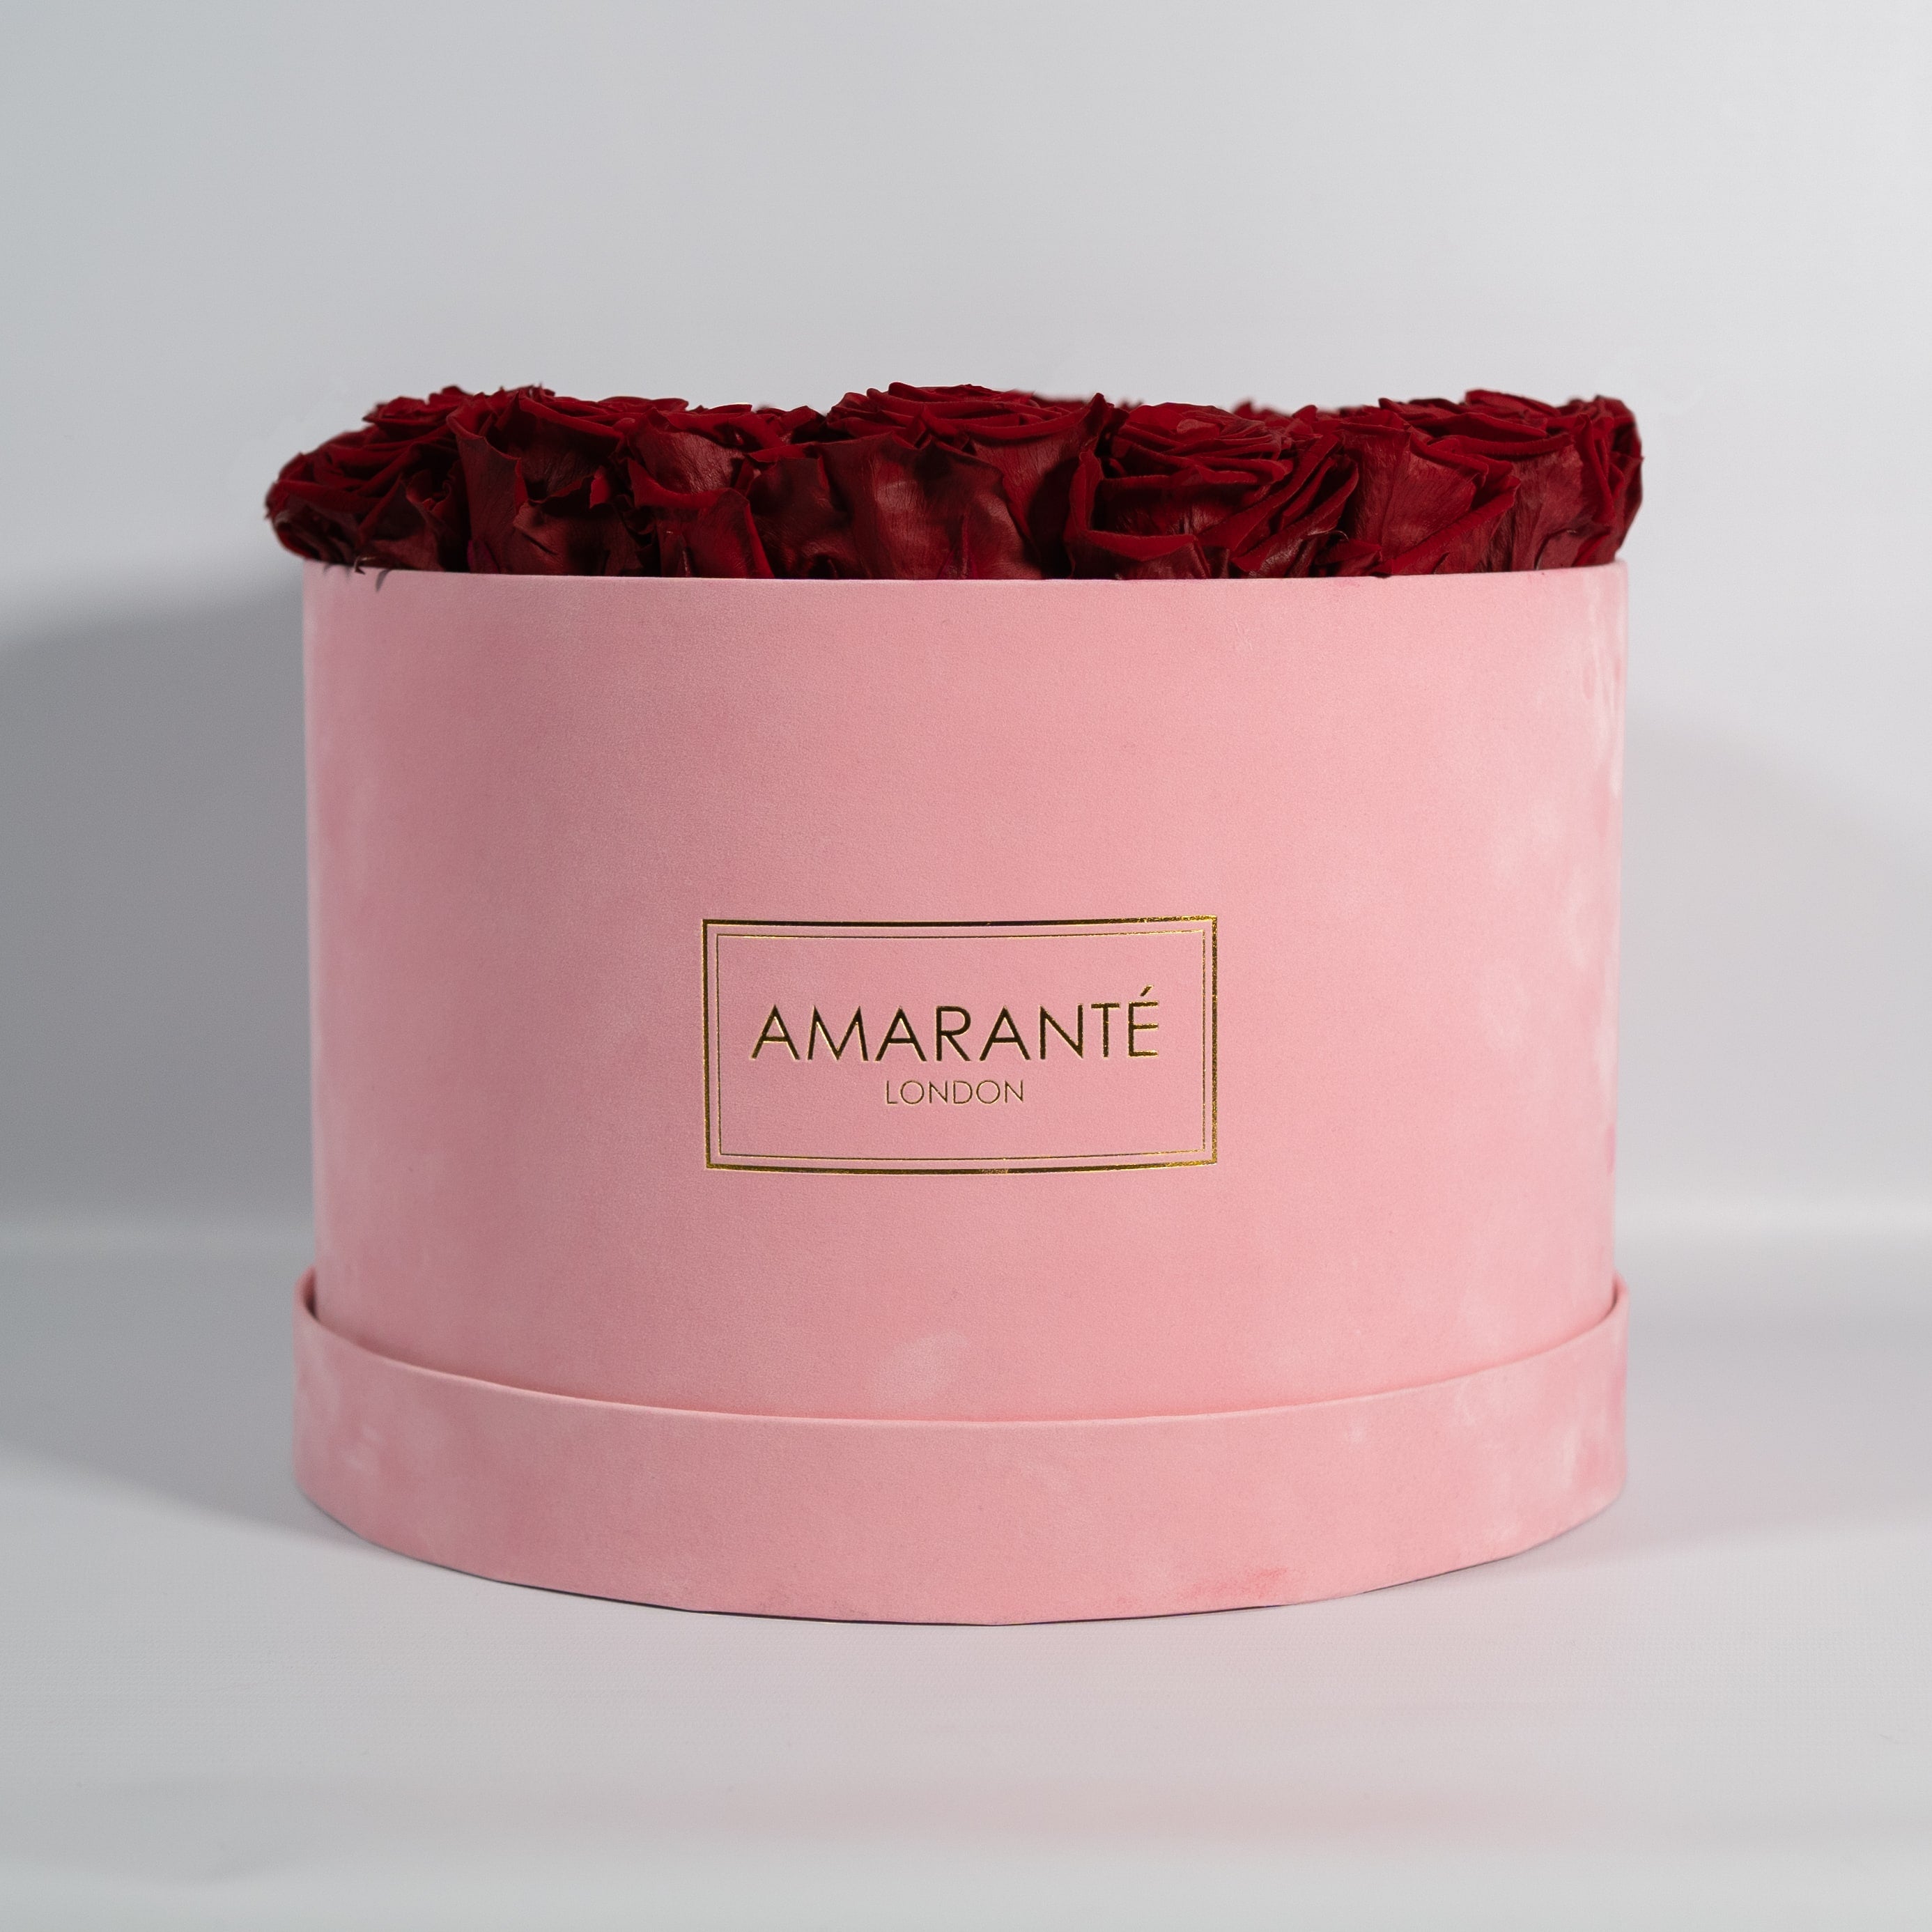 Dreamy dark red Roses in  a stunning pink suede box.